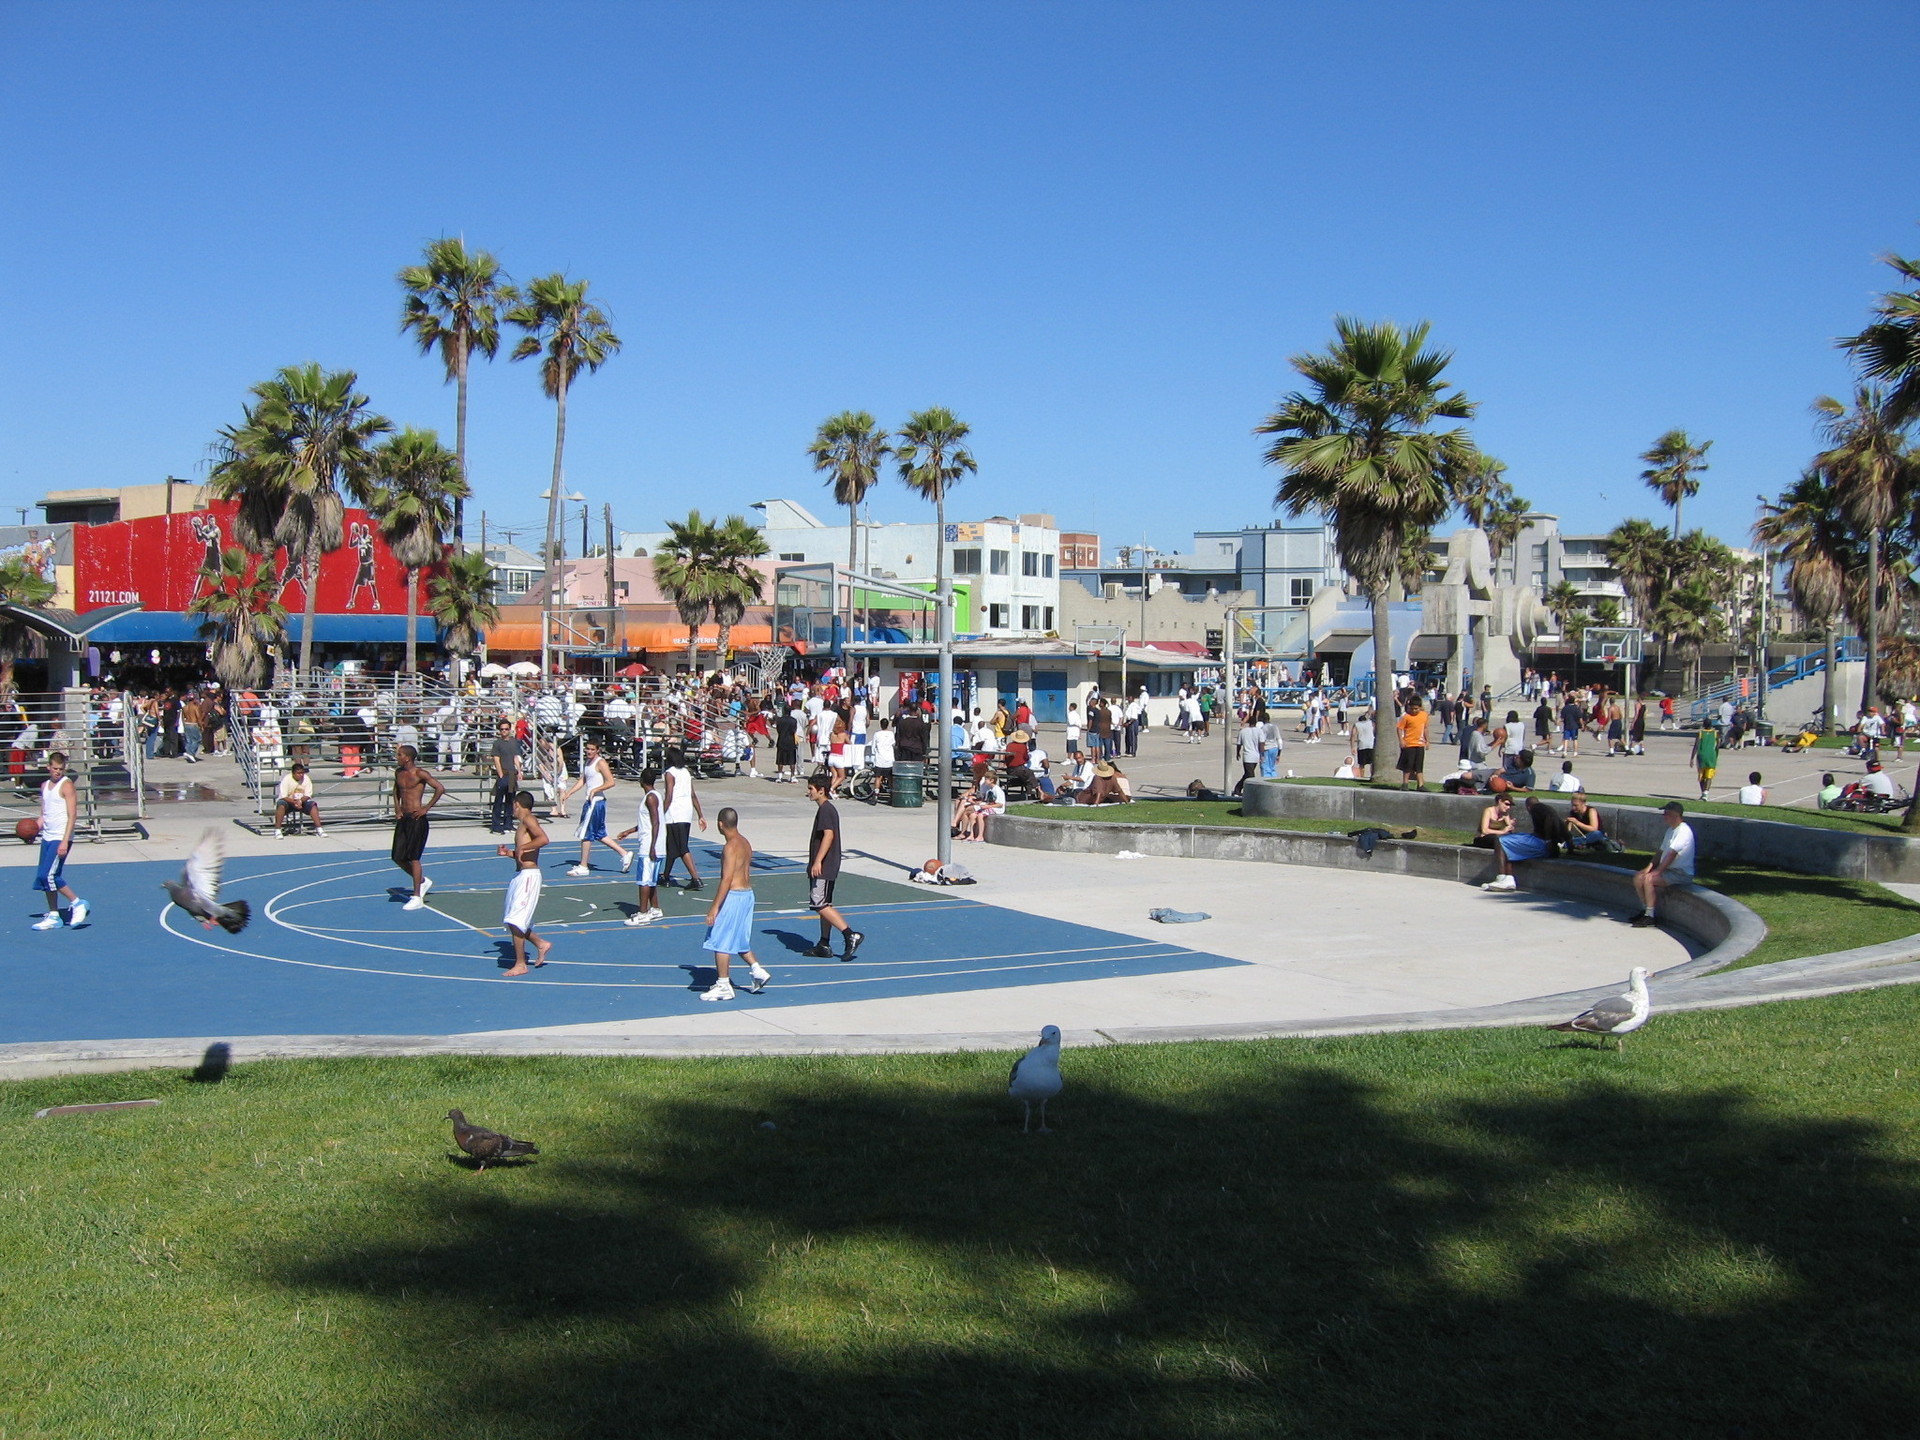 1920x1440 Los Angeles images Venice Beach HD wallpaper and background photos